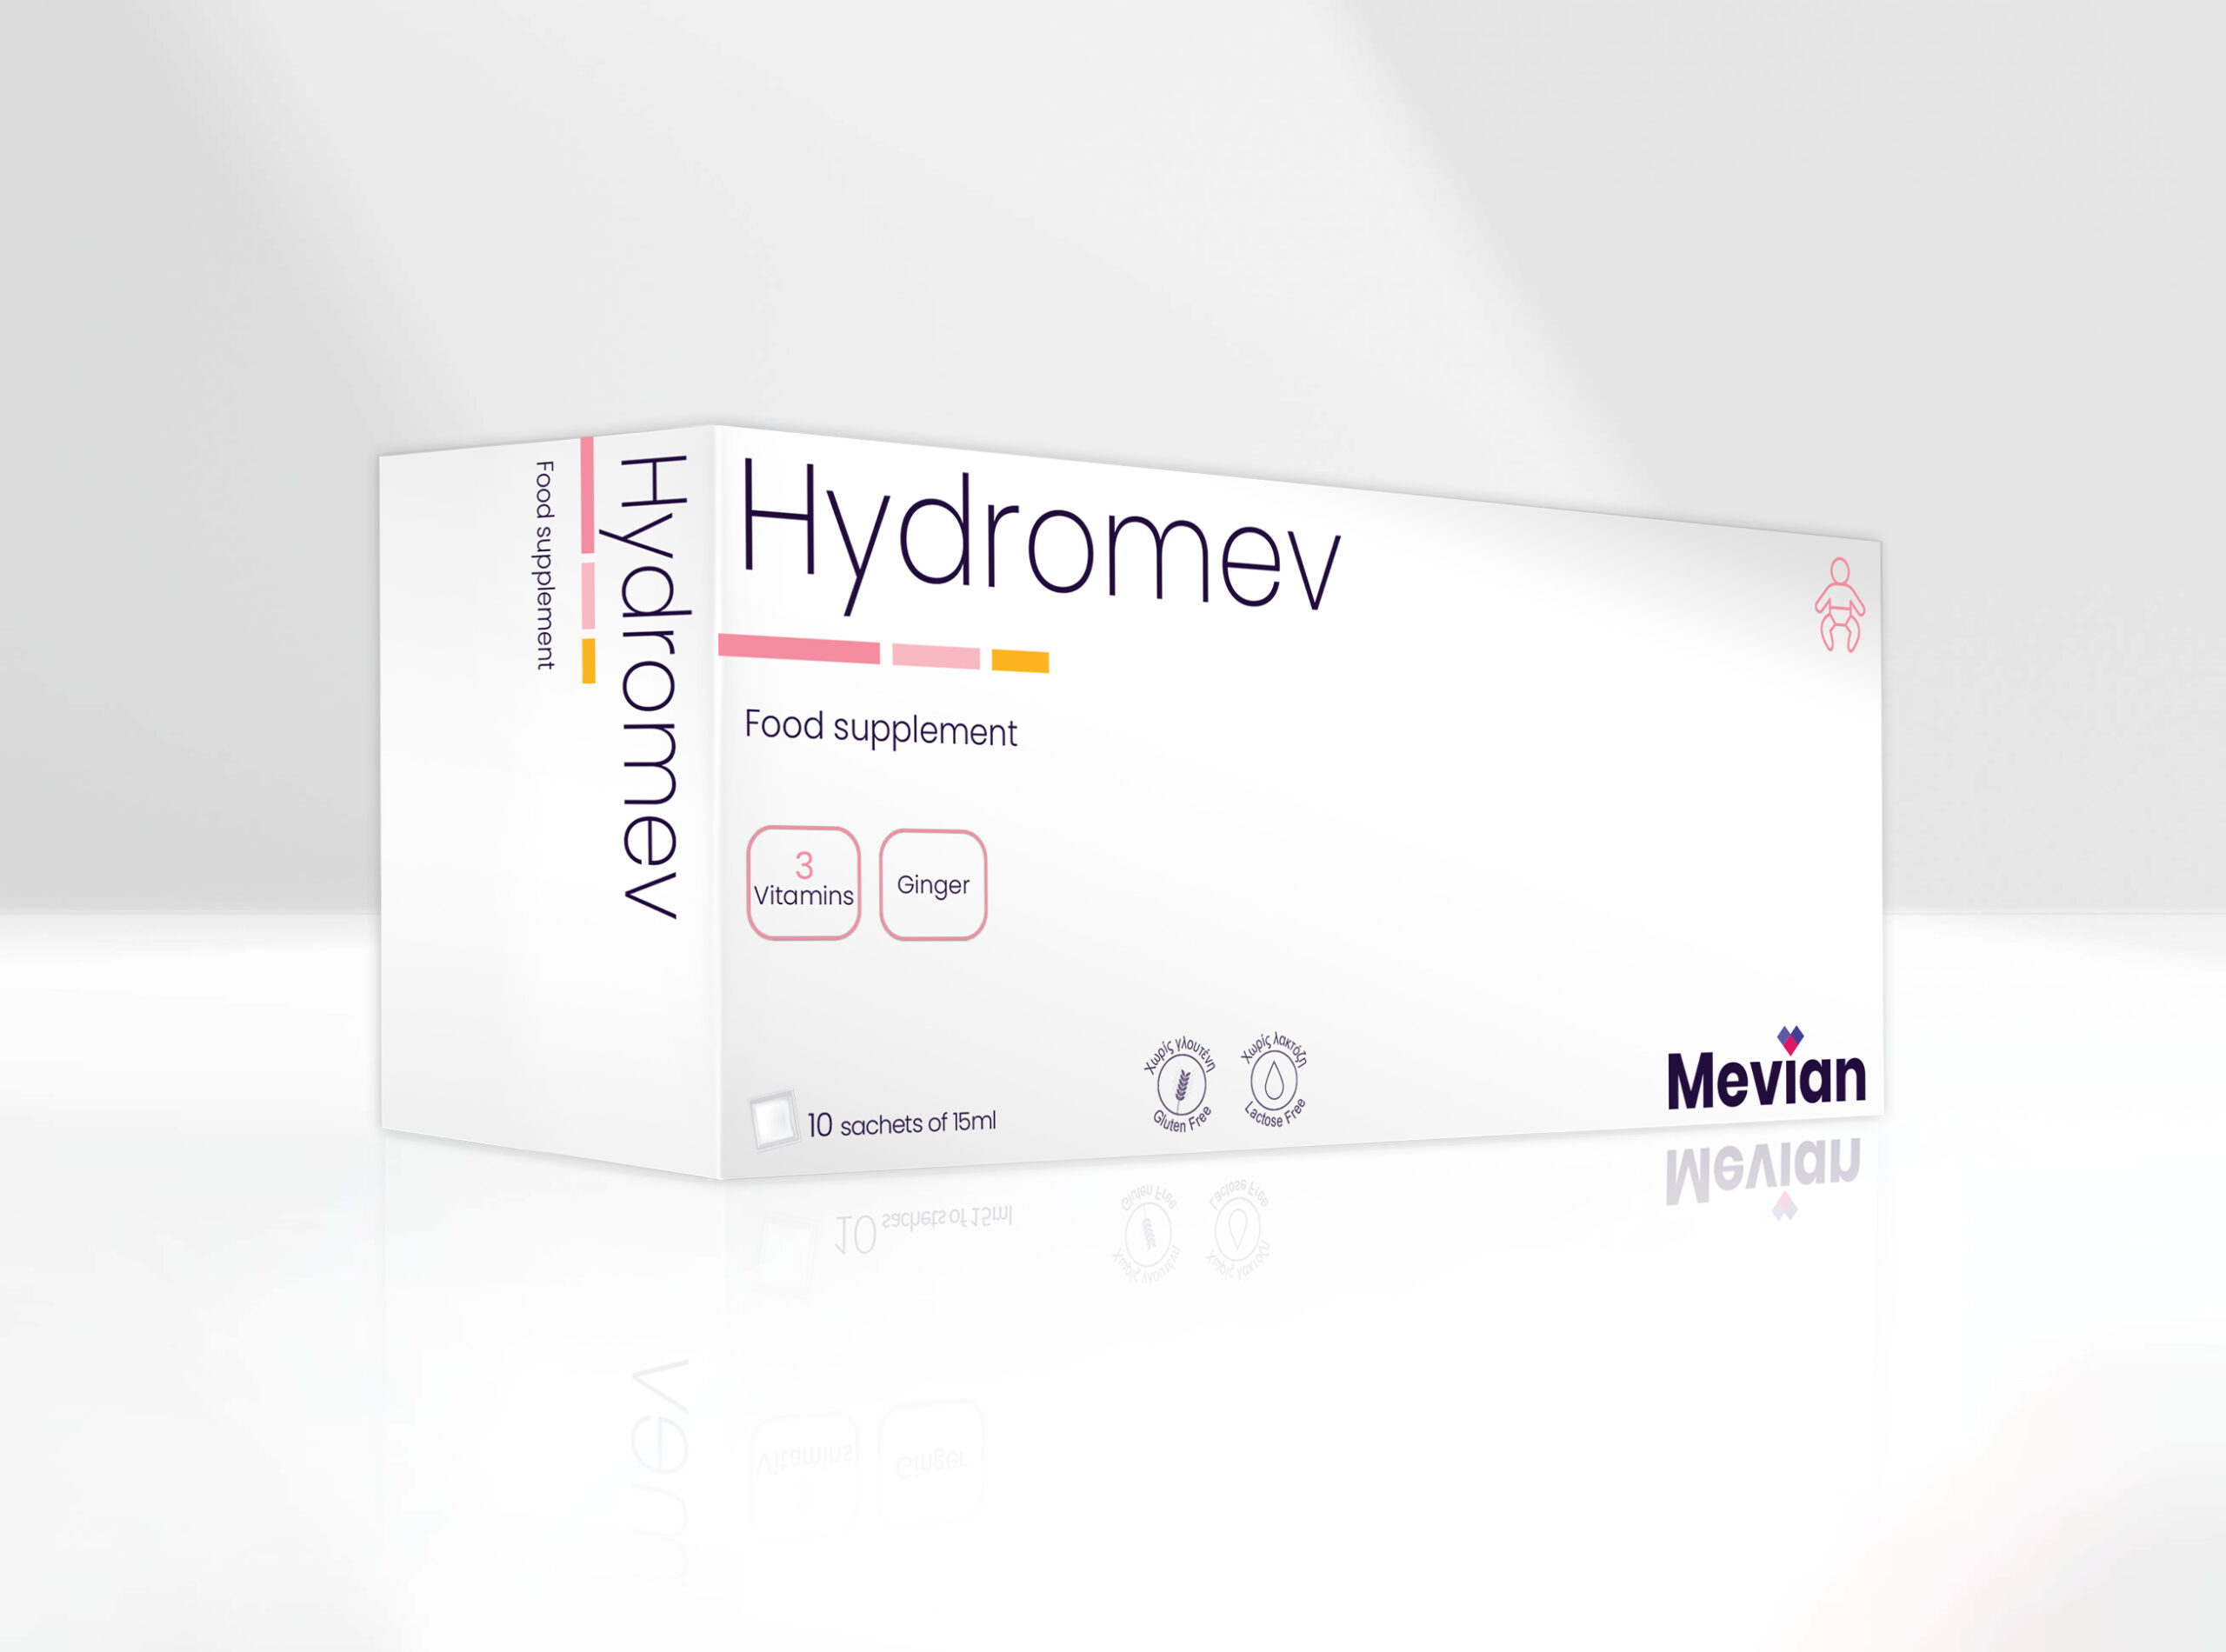 Hydromev is a convenient supplement based on Ginger, Minerals, and Vitamins that perform an antinausea action and is useful for promoting normal<br />
digestive function,nervous system support, and regular gastrointestinal motility.